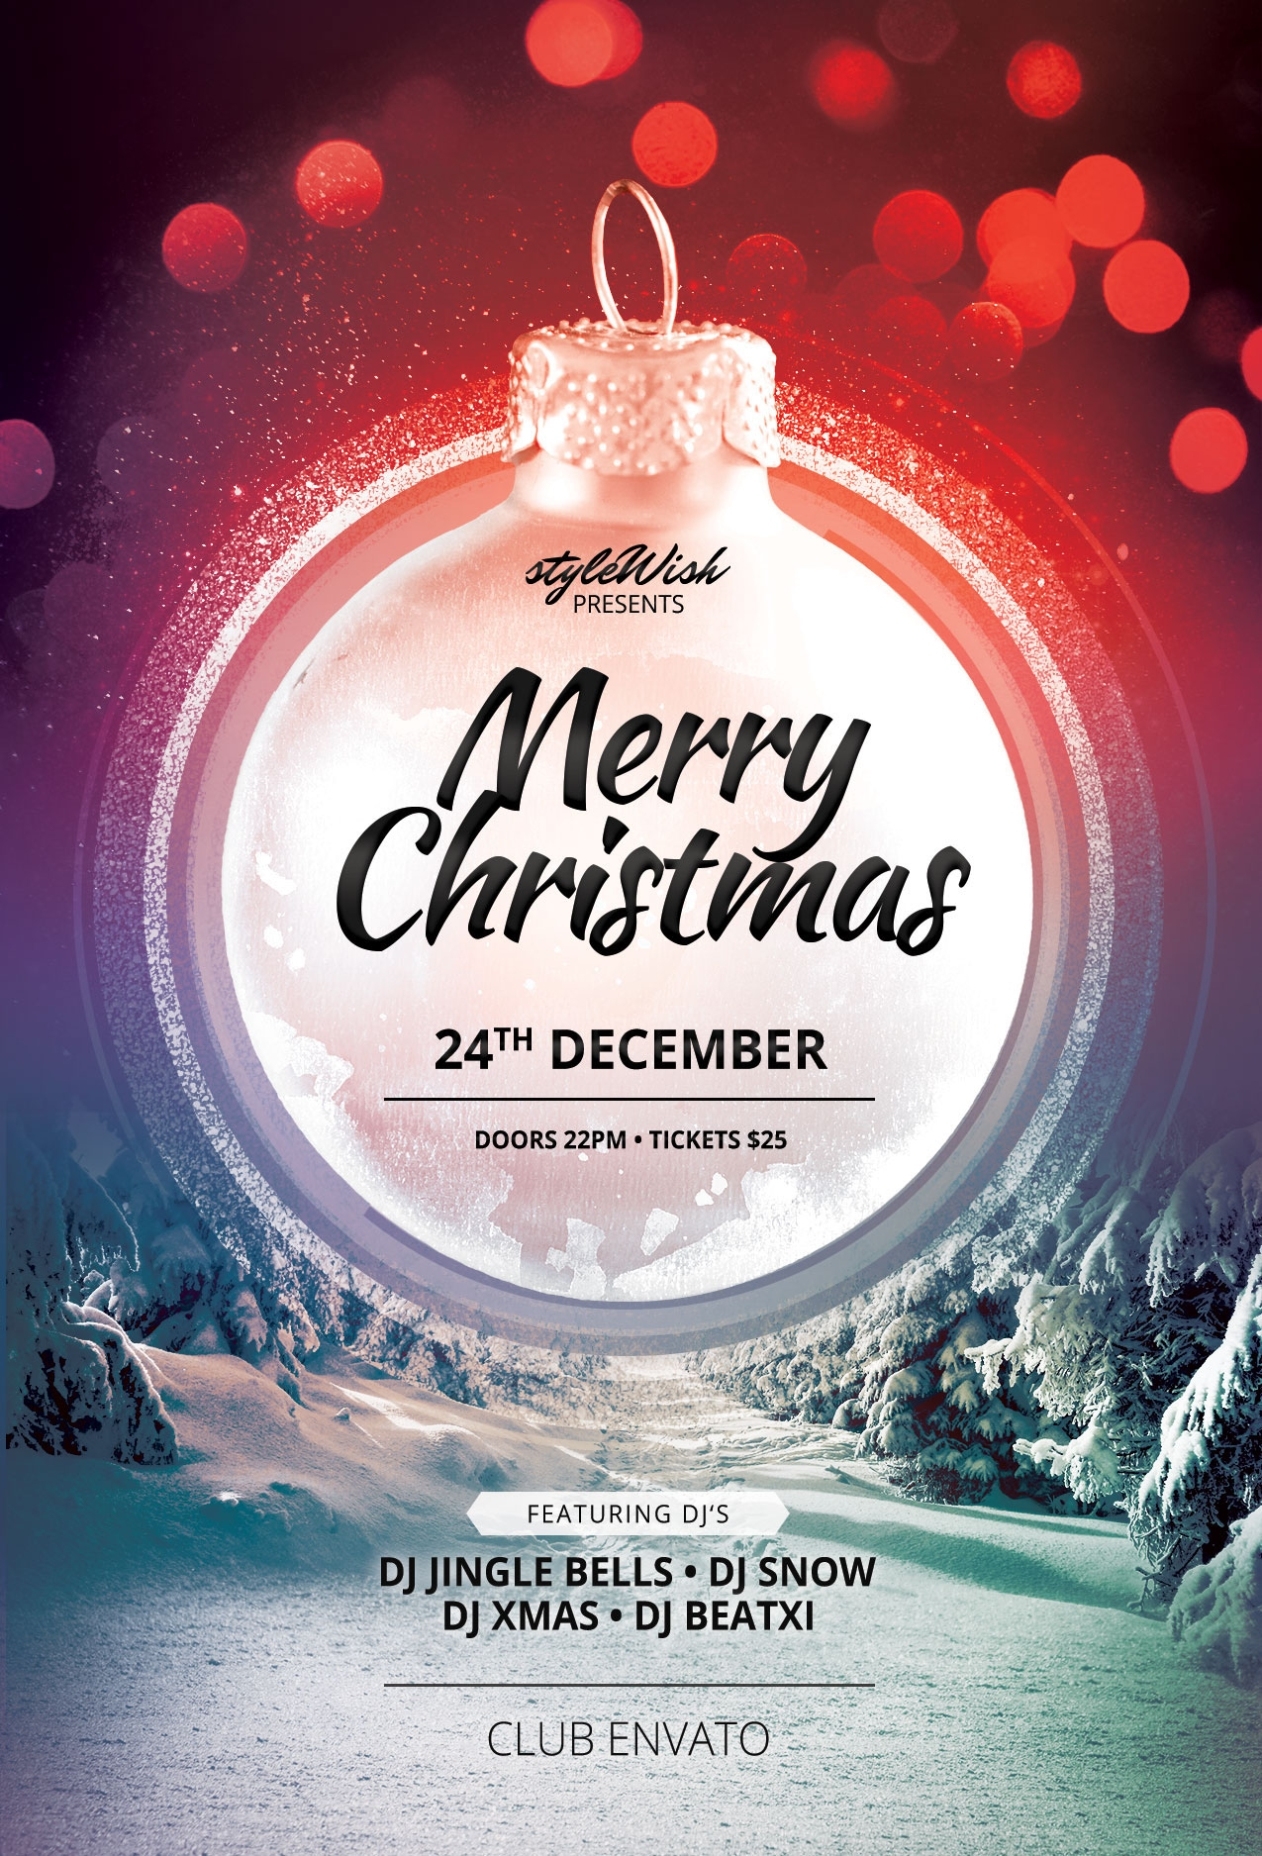 Merry Christmas Flyer Template On Behance With Free Christmas Party Flyer Templates